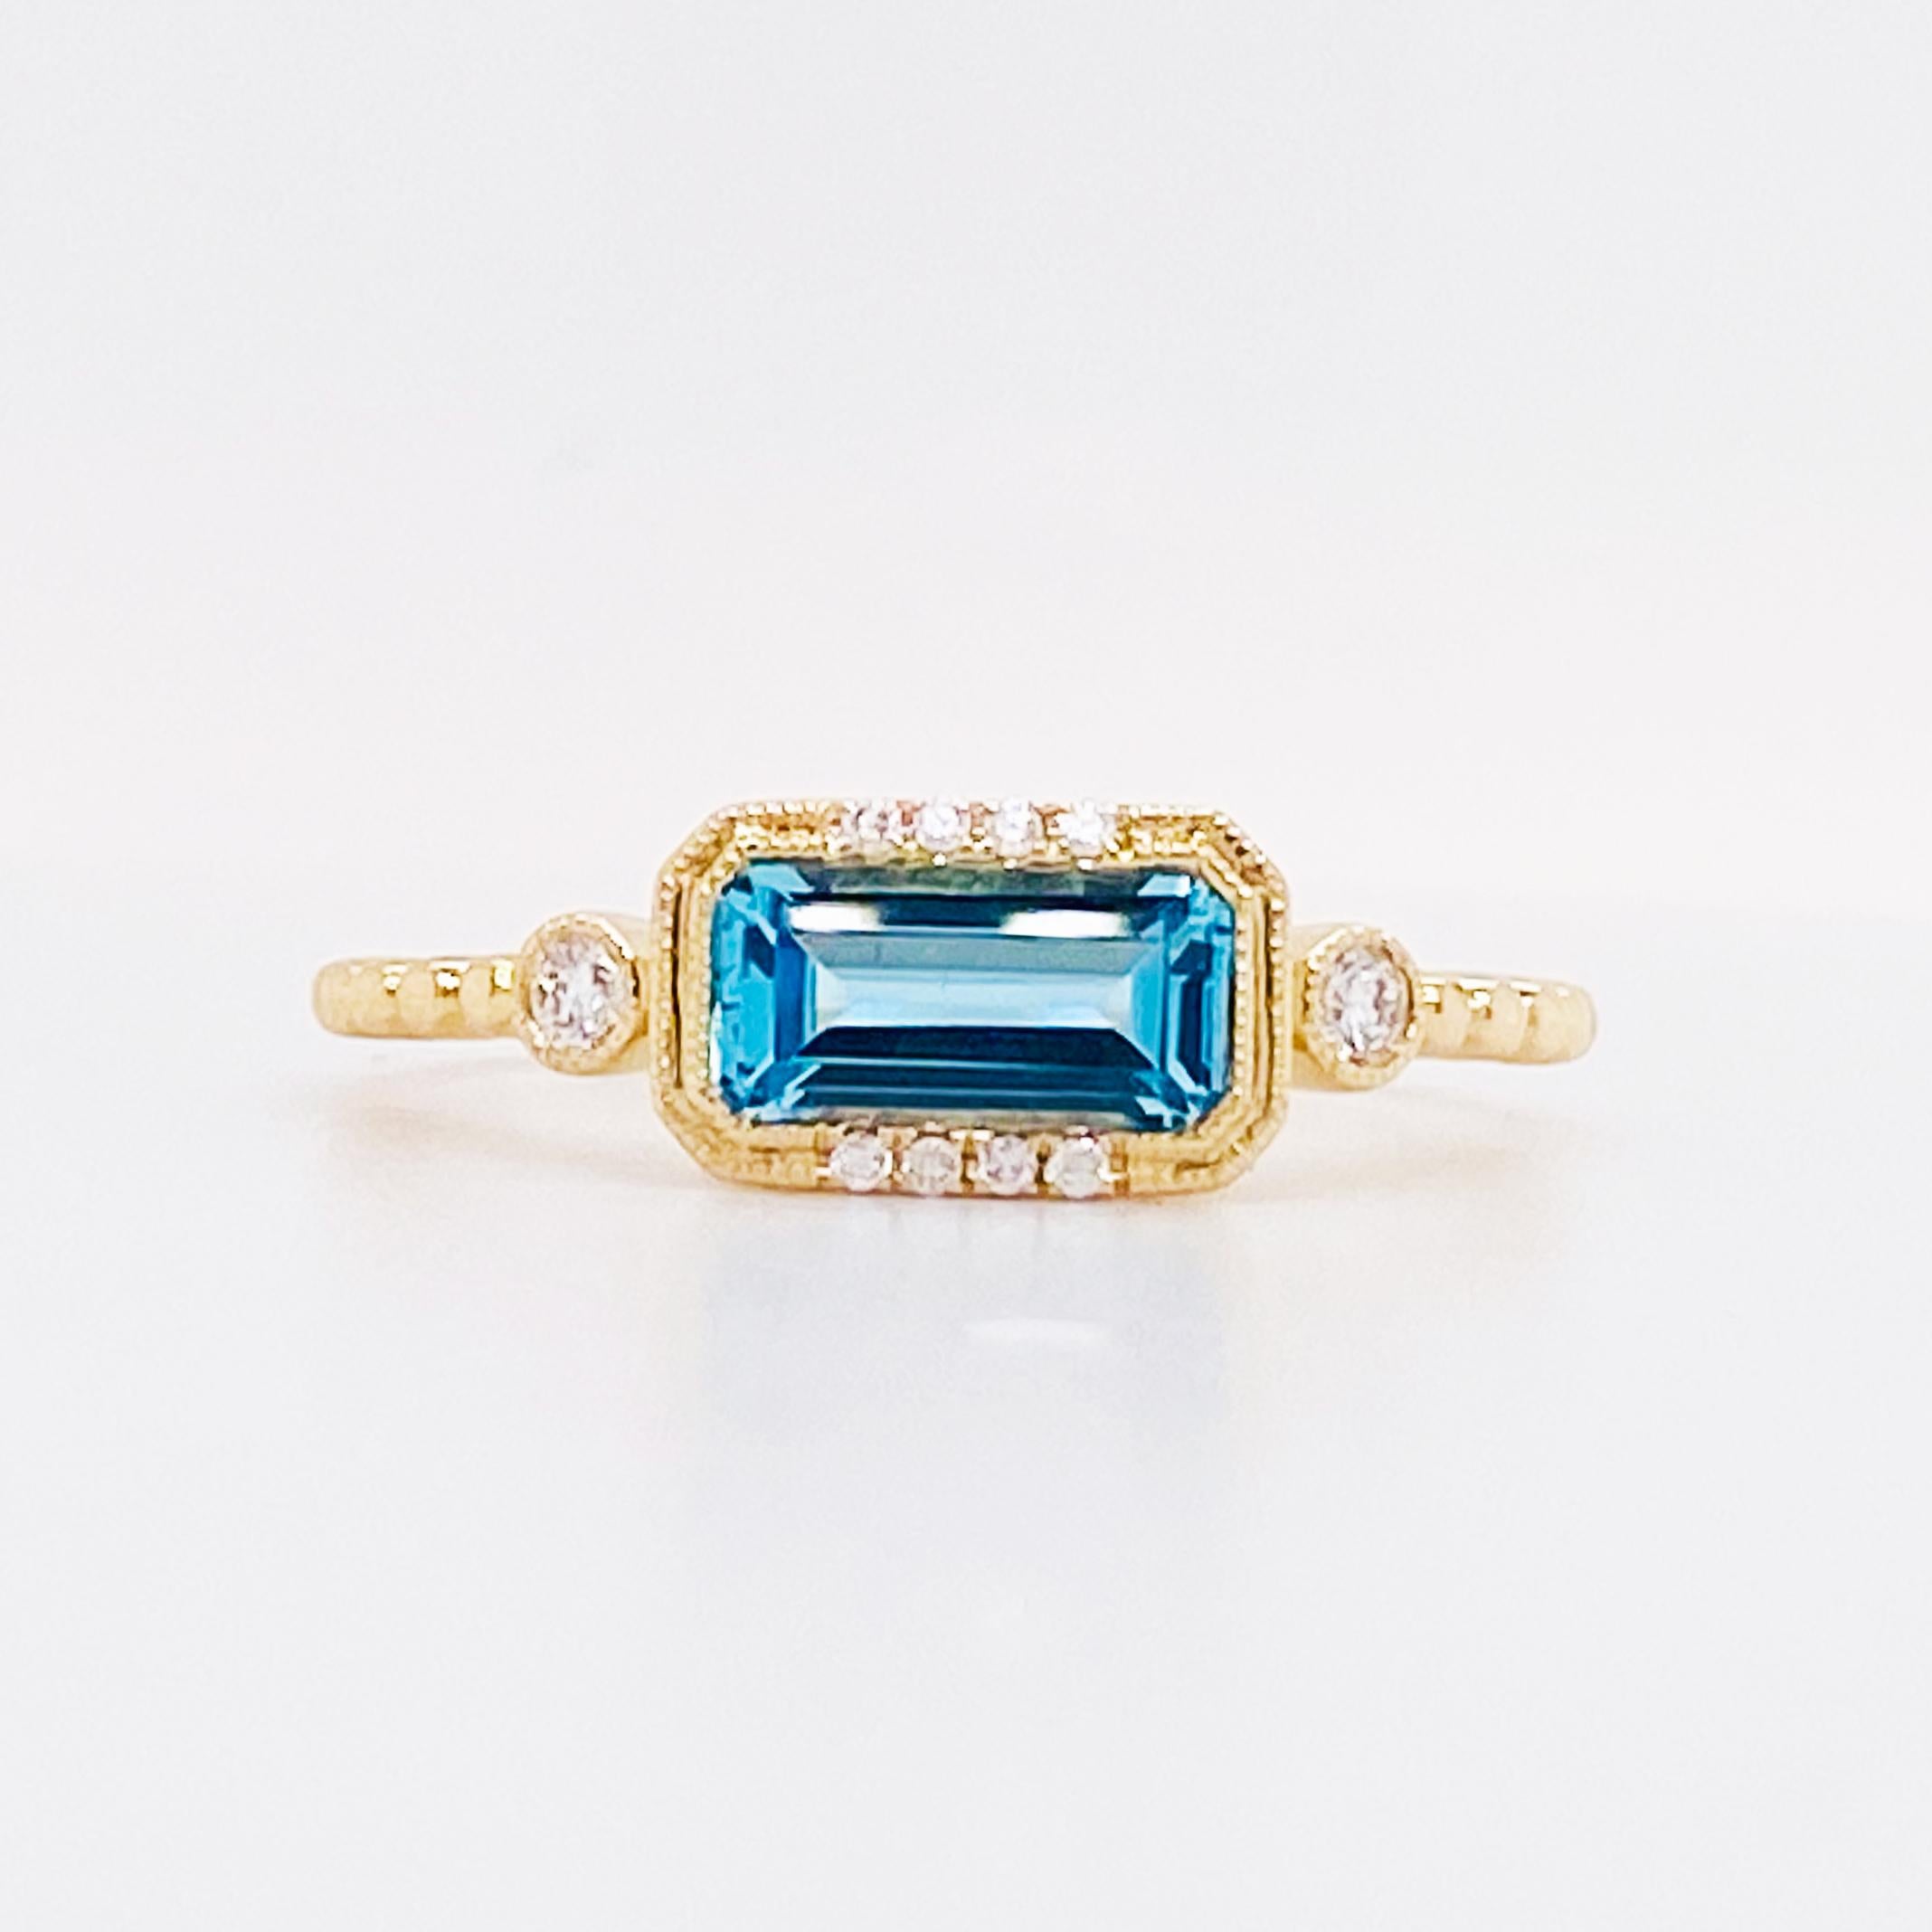 For Sale:  Blue Topaz Diamond Ring 14K Gold Emerald Cut Topaz Modern Ring, East to West 3